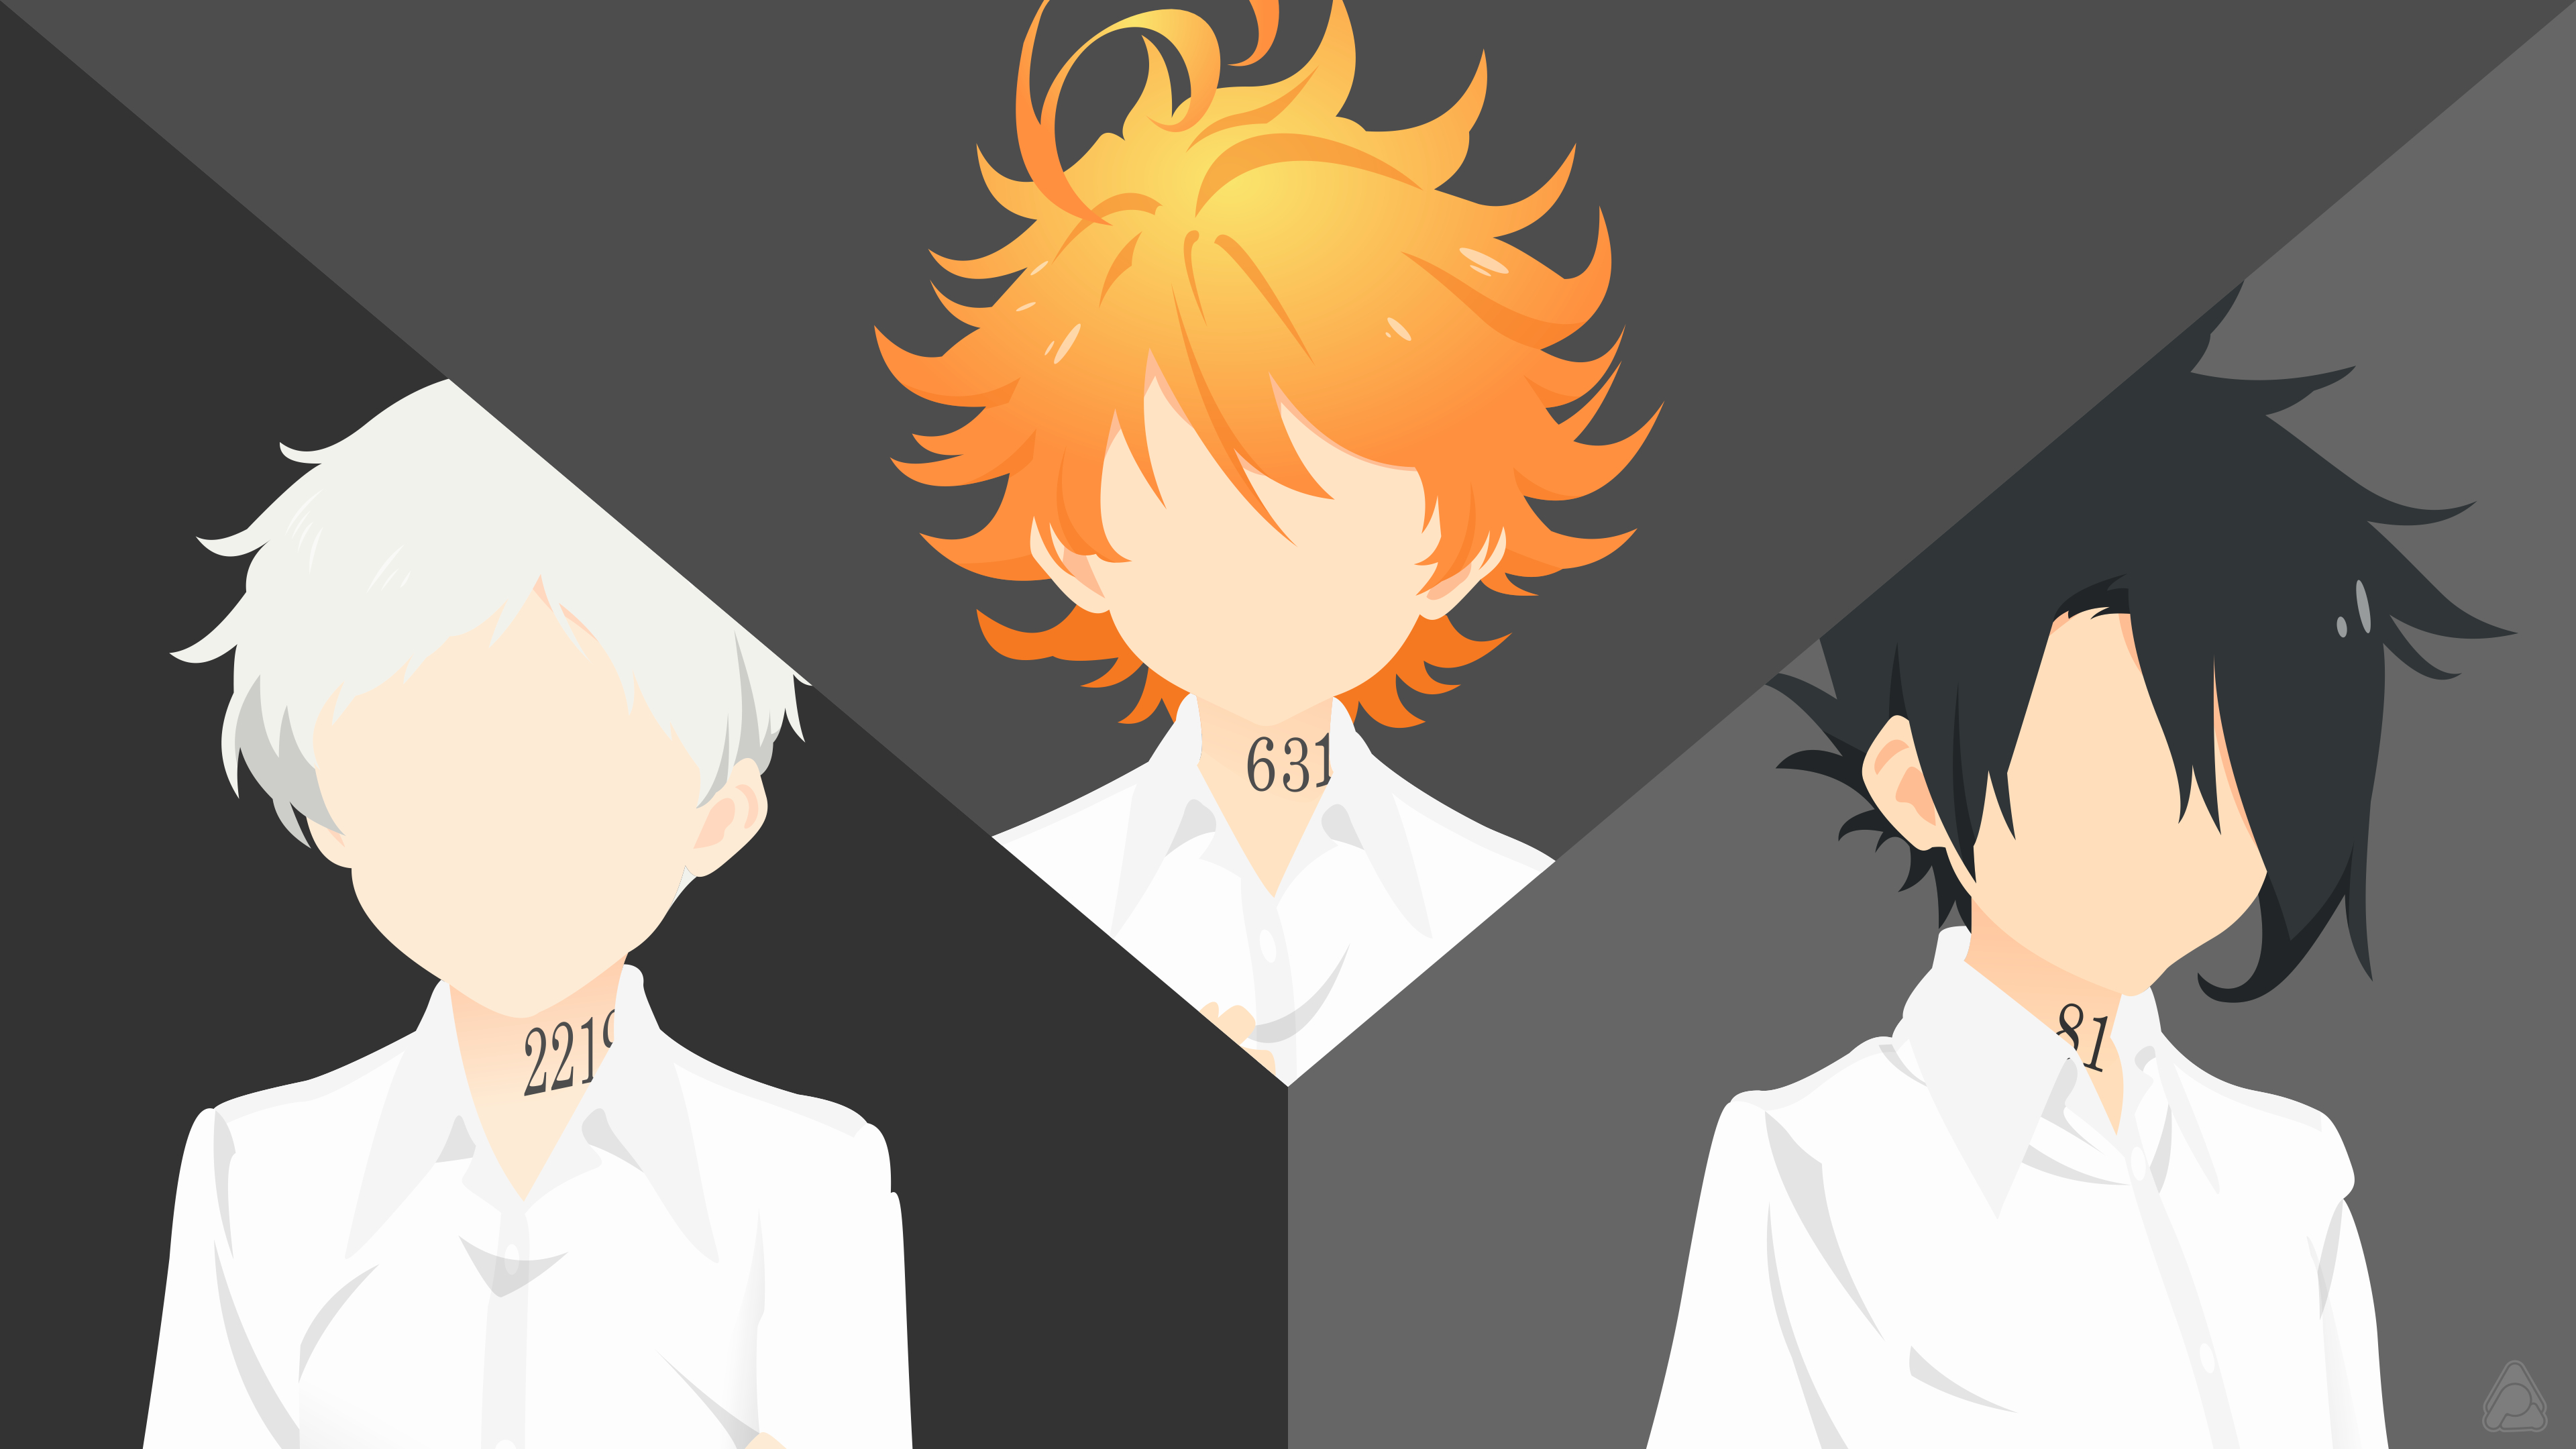 3840x2160 Wallpaper : The promised neverland, Emma The Promised Neverland, Norman The Promised Neverland, Ray The Promised Neverland LongLife 1604485 HD Wallpapers